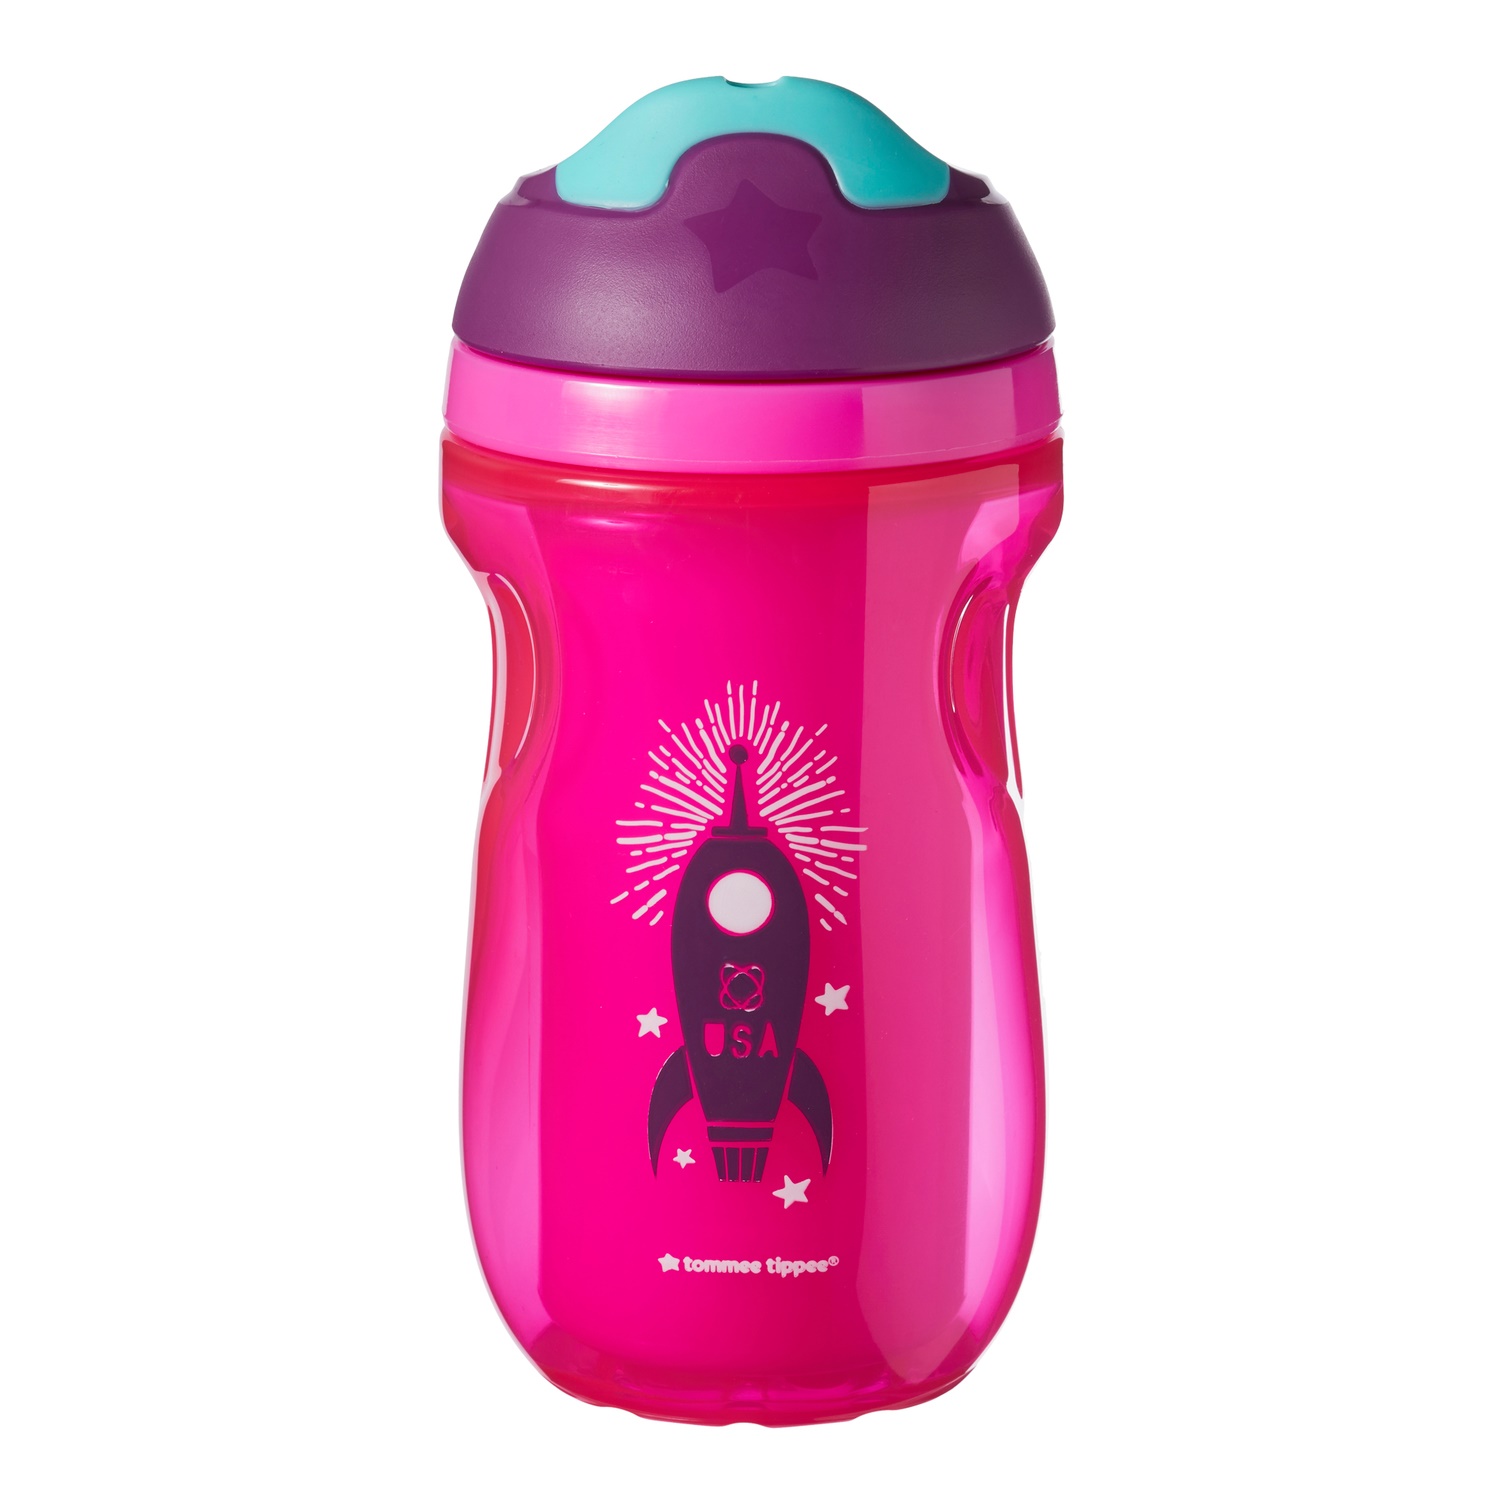 Tommee Tippee Active Sipper drikkeflaske 12md+, lilla, 1 stk.